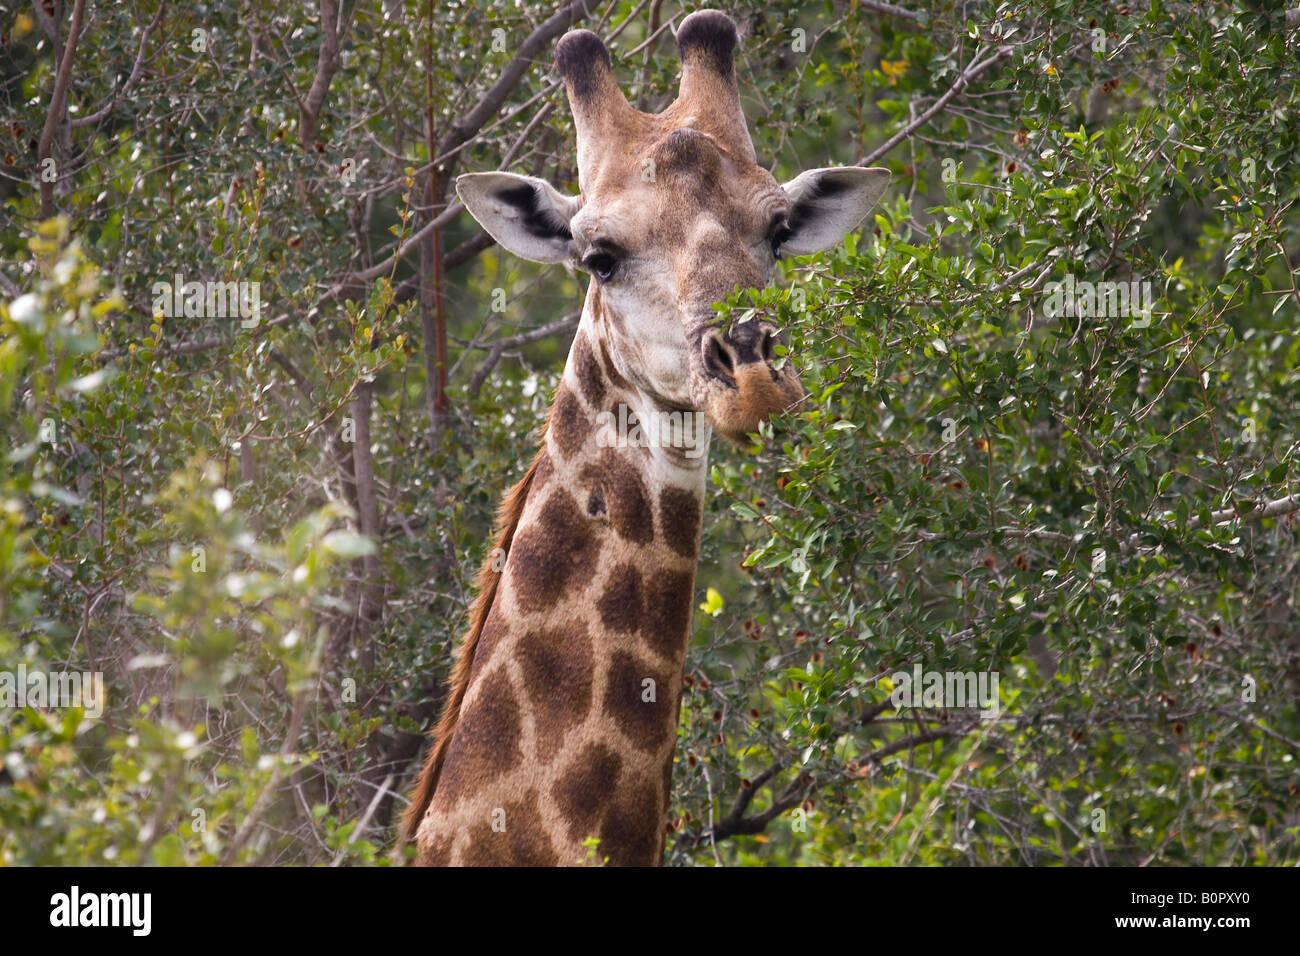 A very thick necked Giraffe at Kruger NP Stock Photo